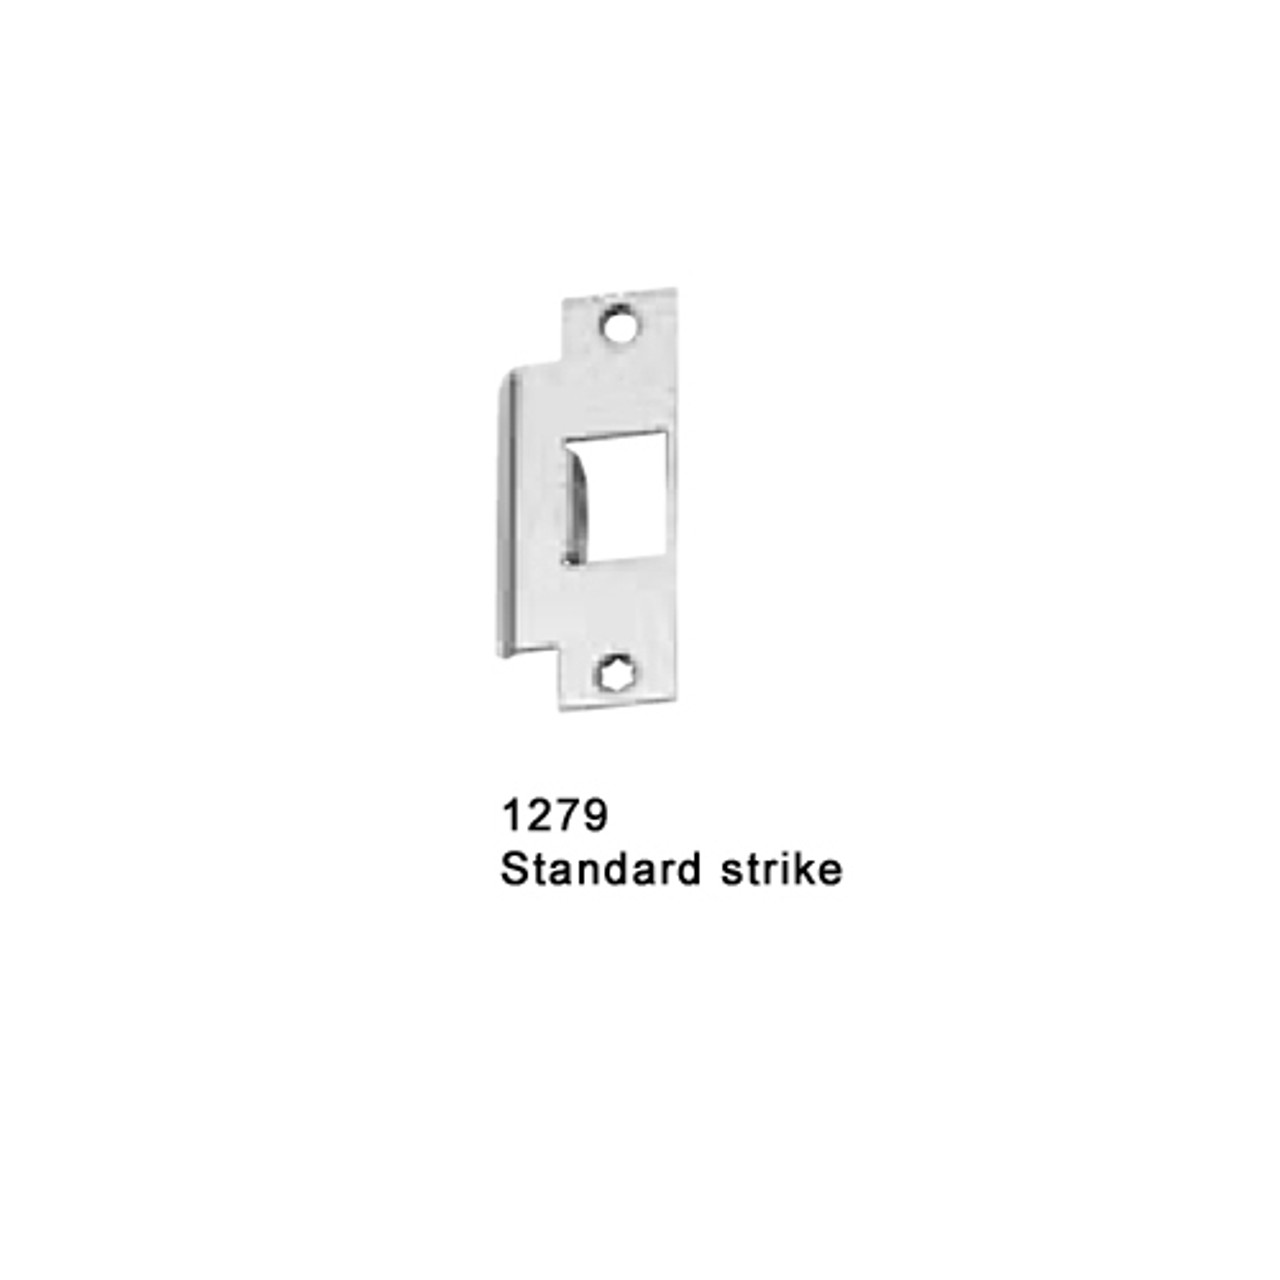 F-25-M-L-BE-Dane-US19-4-RHR Falcon 25 Series Fire Rated Mortise Lock Devices 510L-BE Dane Lever Trim with Blank Escutcheon in Flat Black Painted